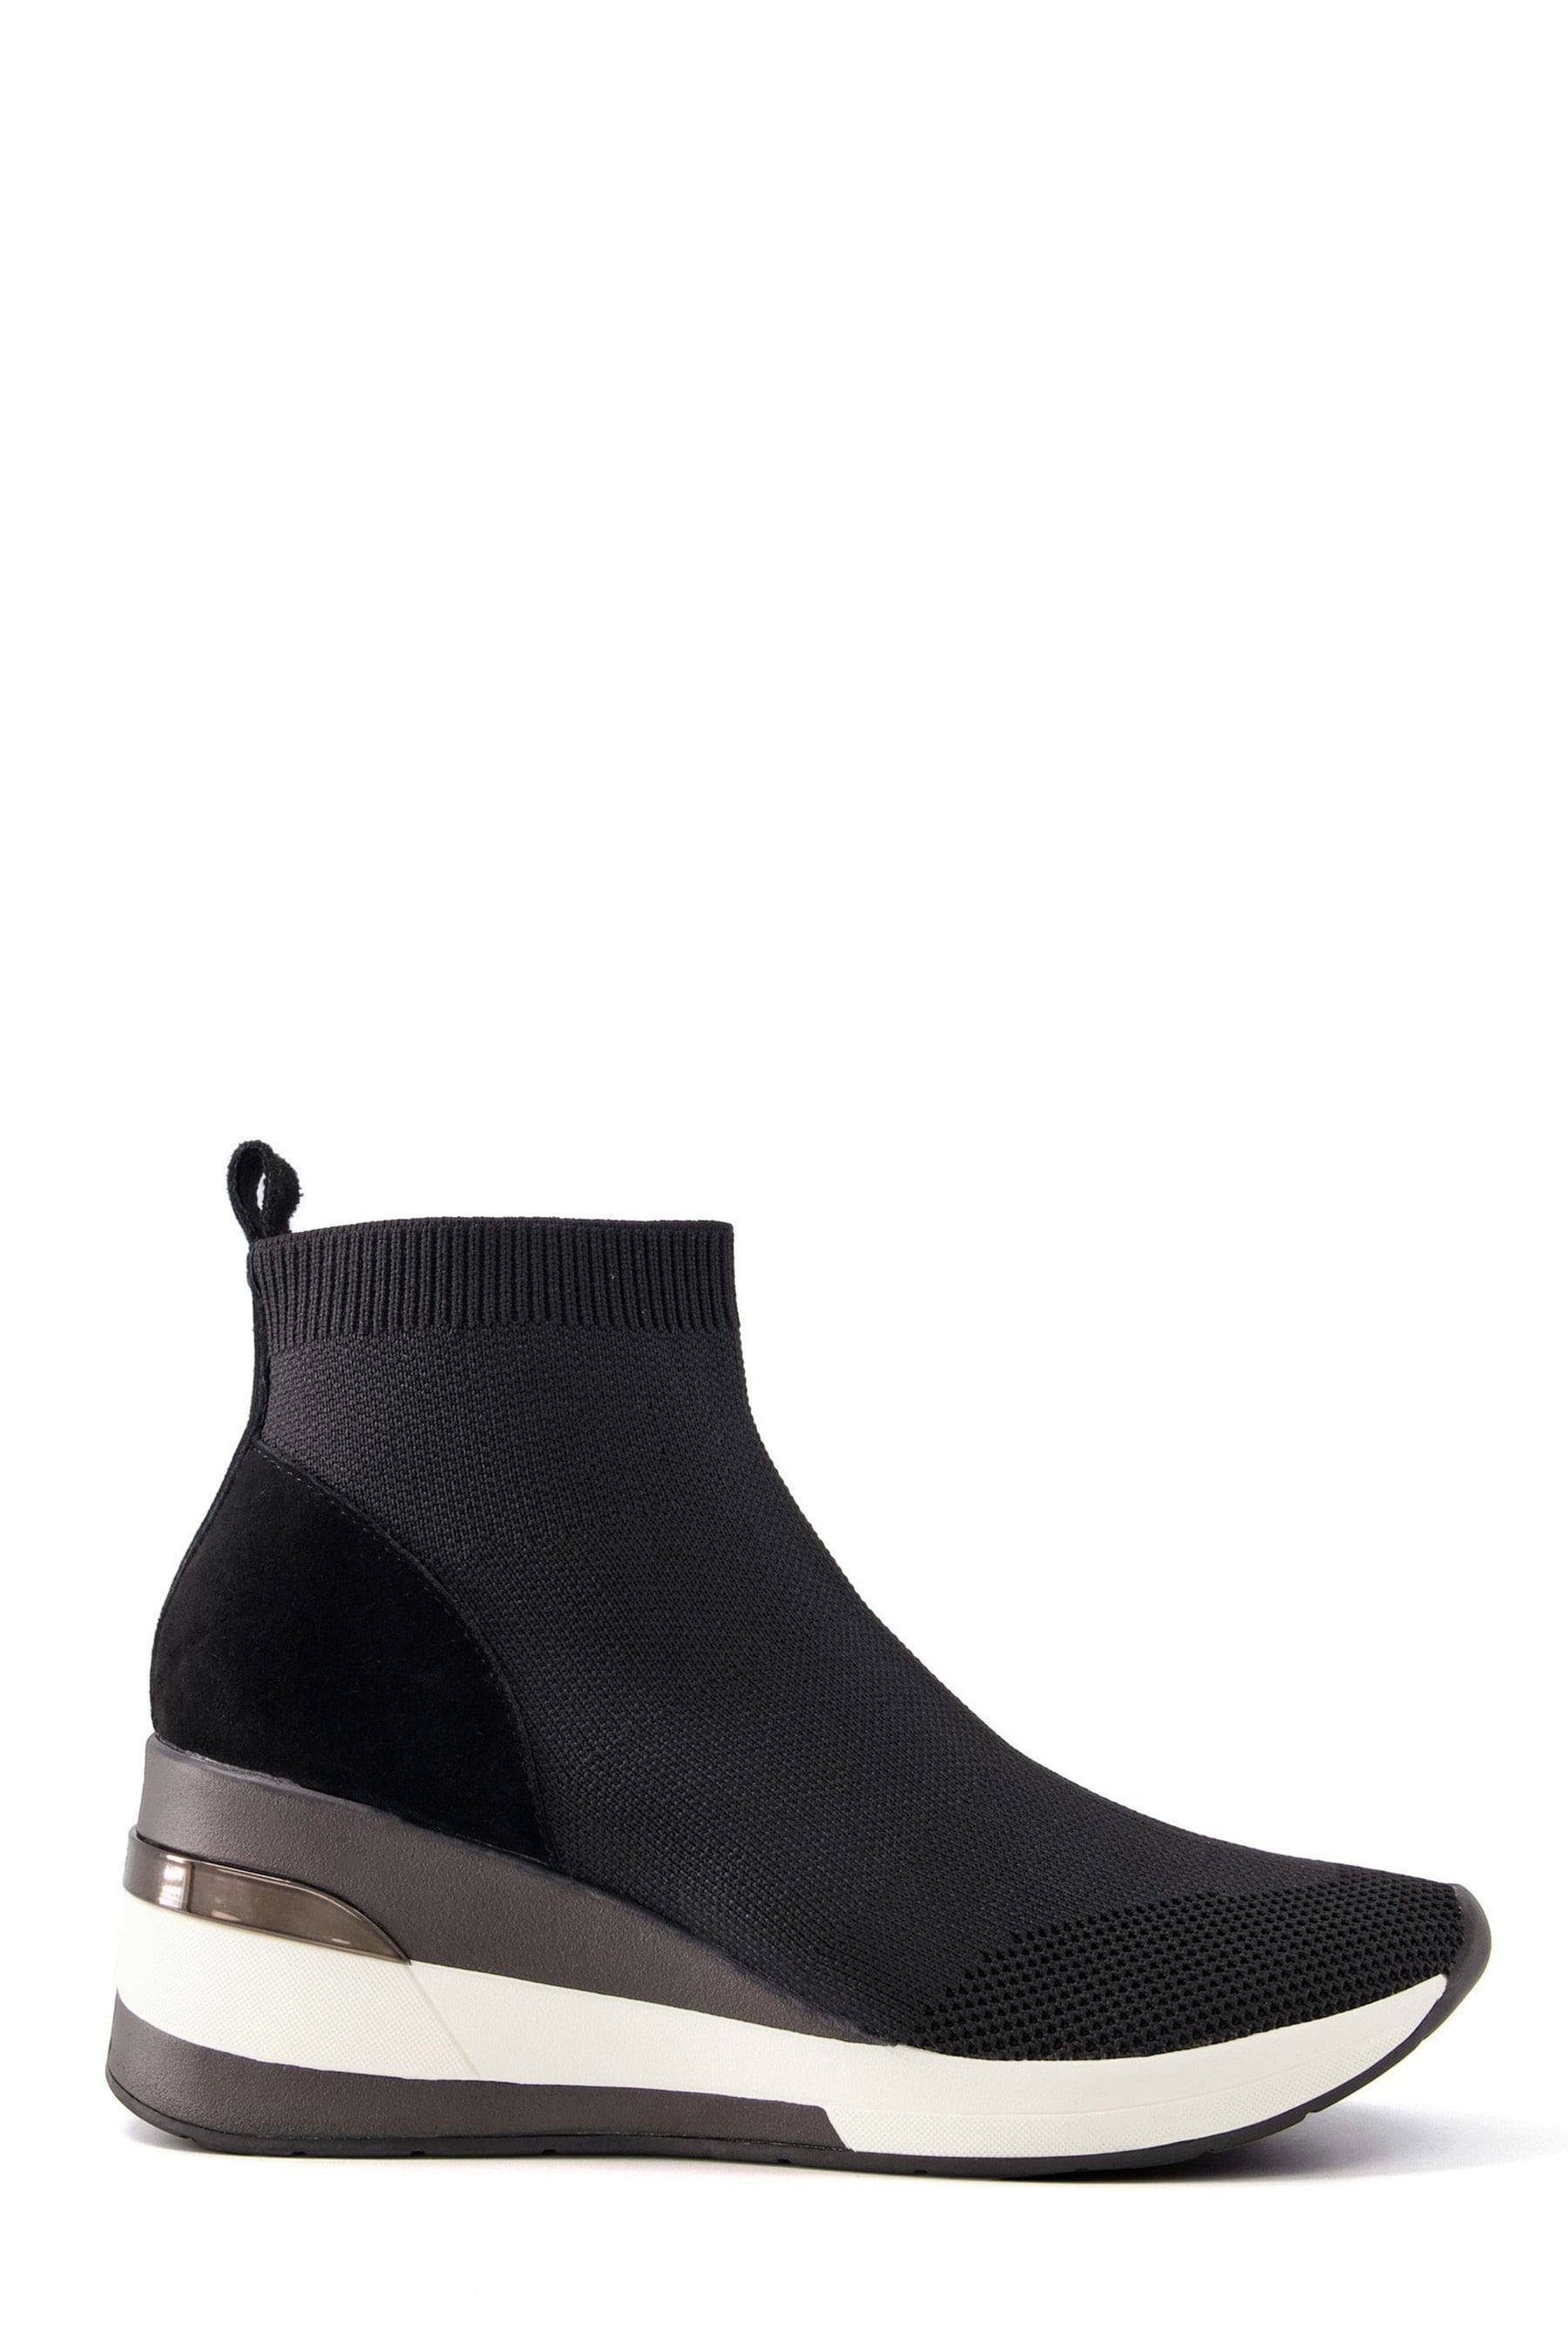 Buy Dune London Black Wf Engel Sock Boot Wedge Trainers from the Next ...